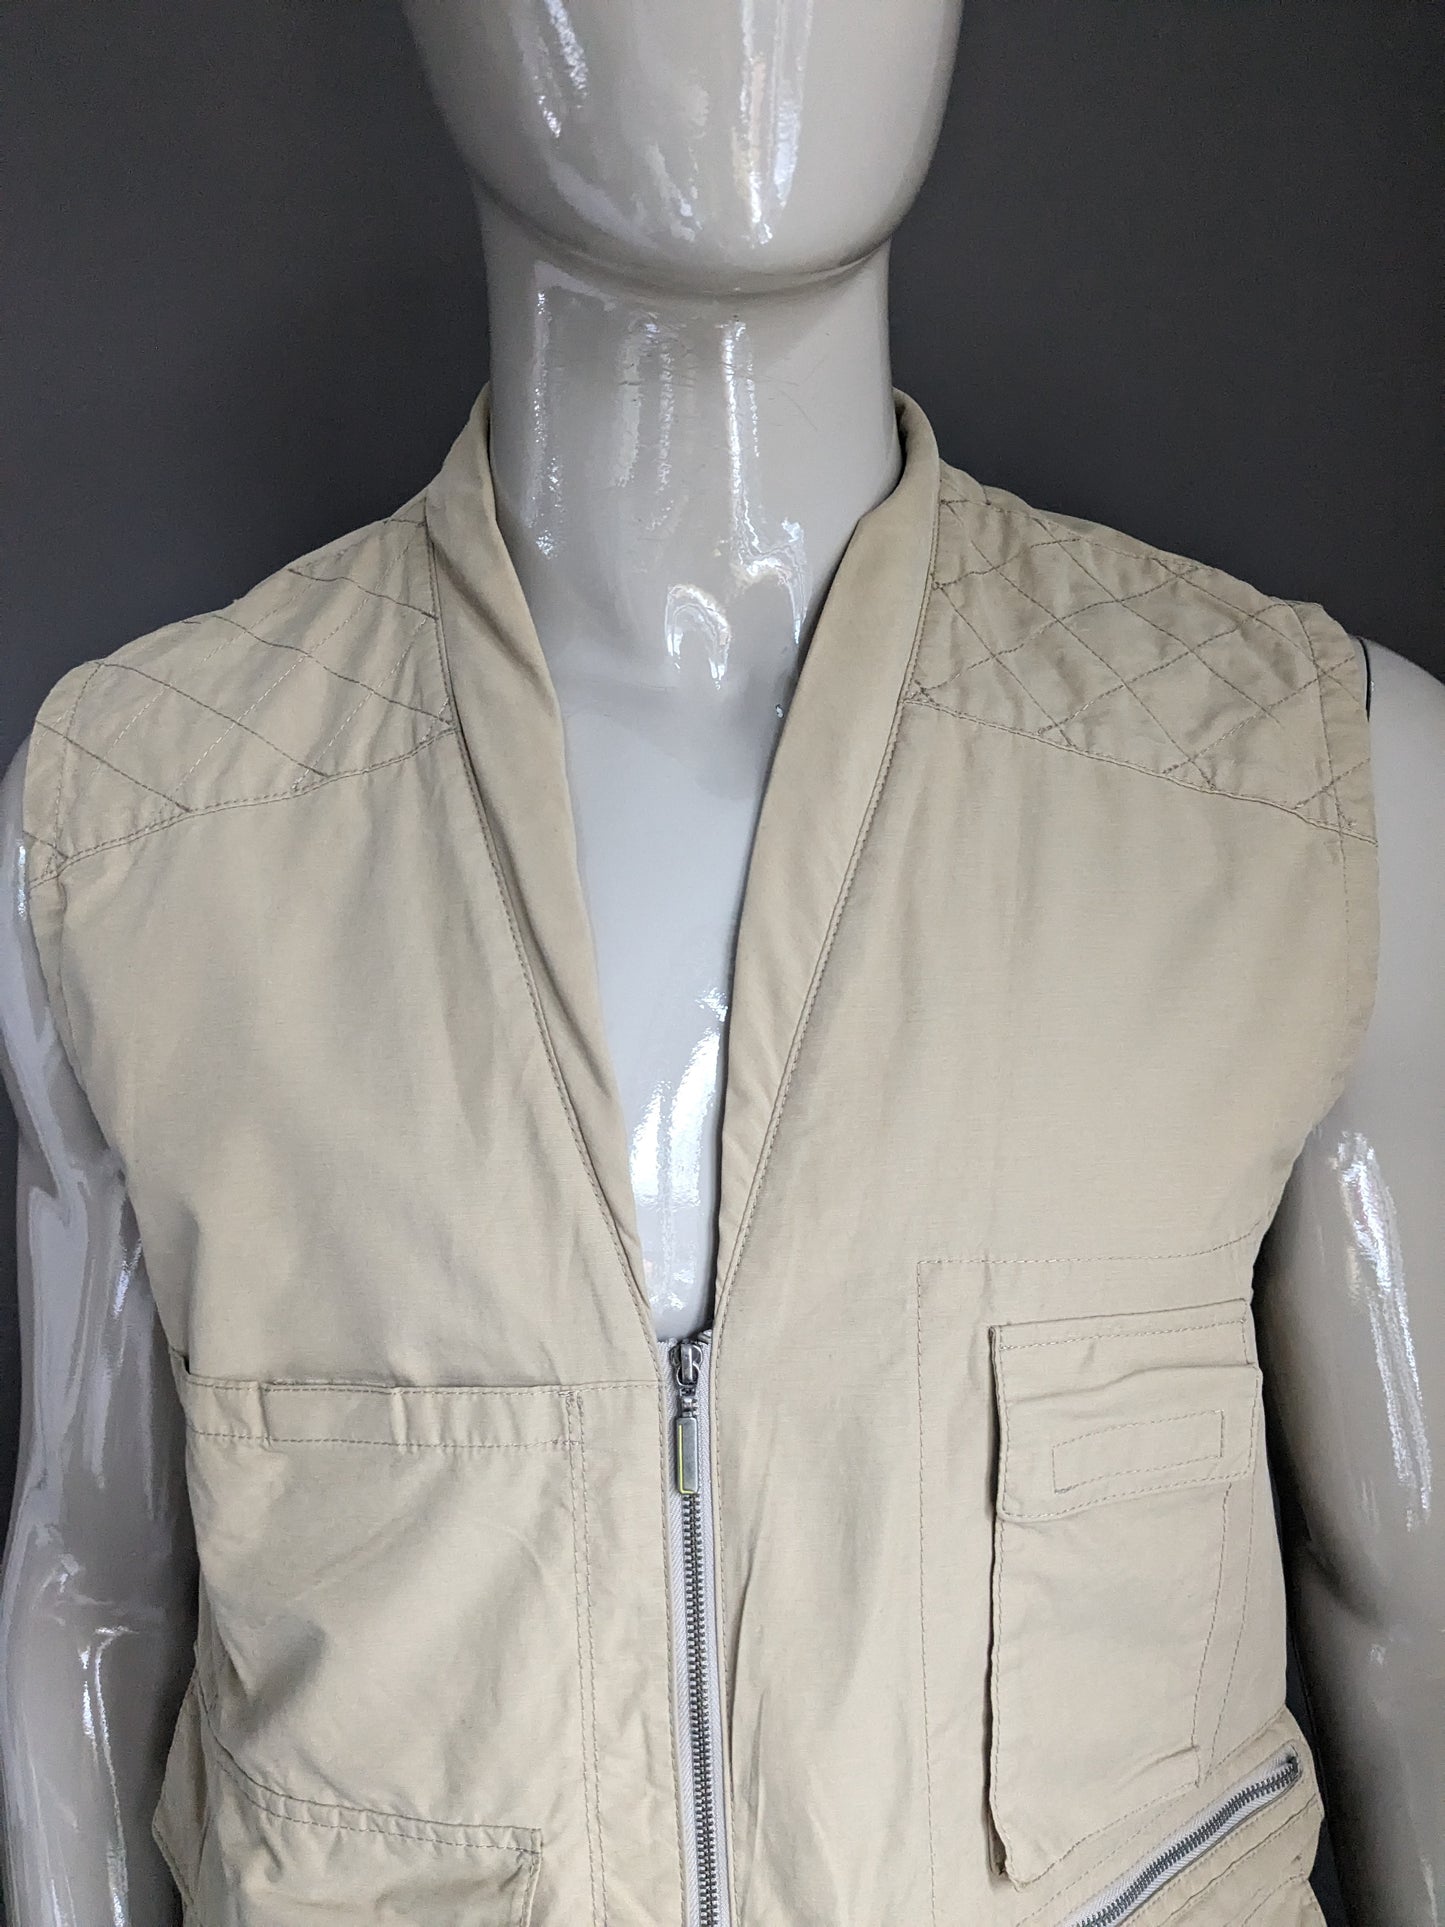 Camel Active Dunne Body Warmer. Beige colored. Size M.